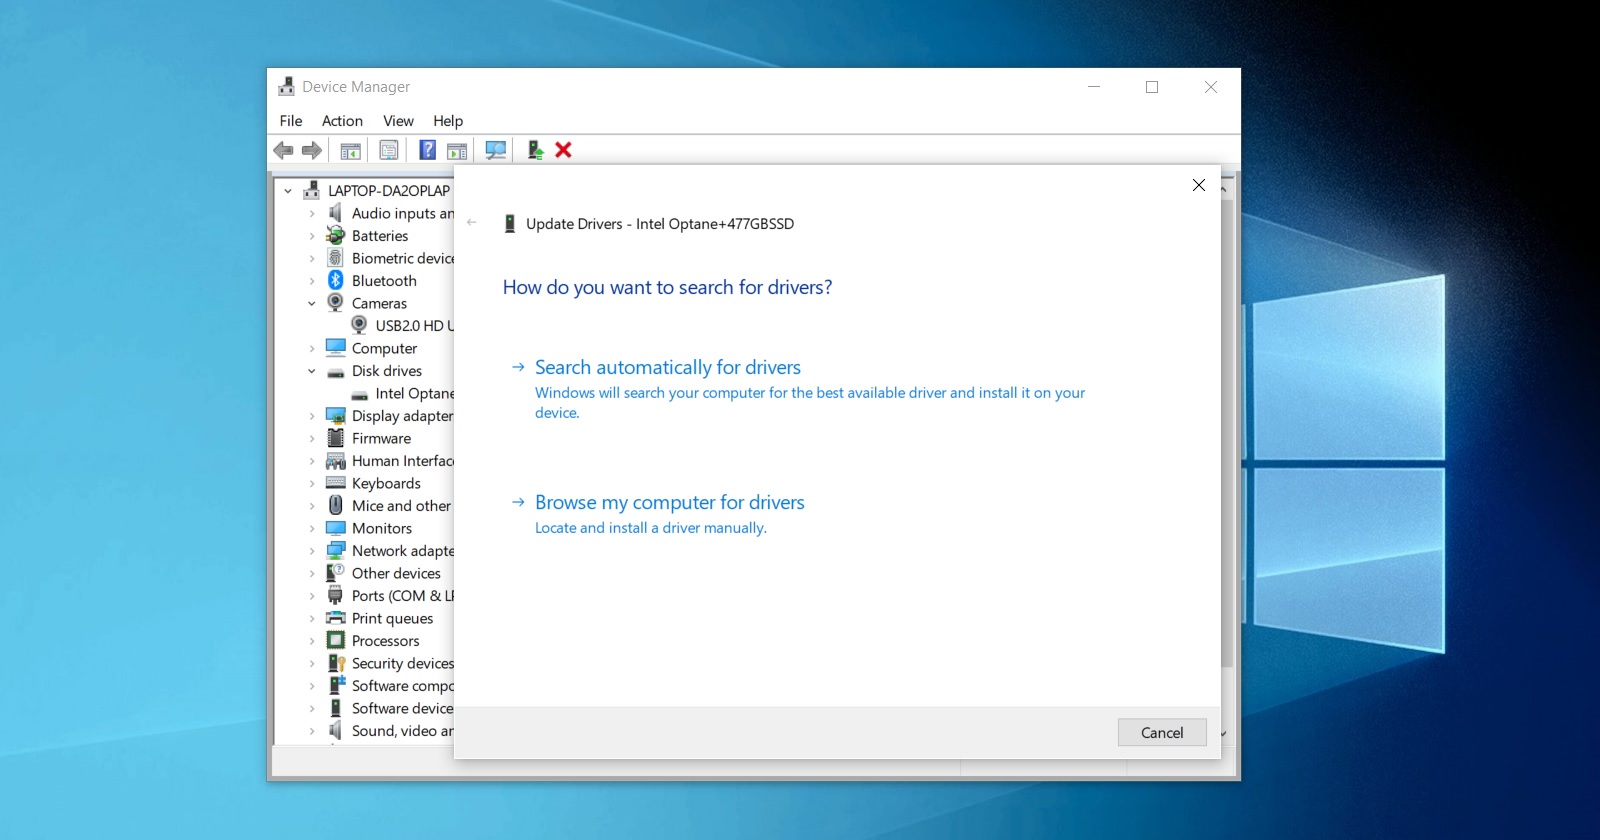 Windows will search for the latest driver for the device and install it automatically.
Follow any additional instructions provided by the driver installation wizard.